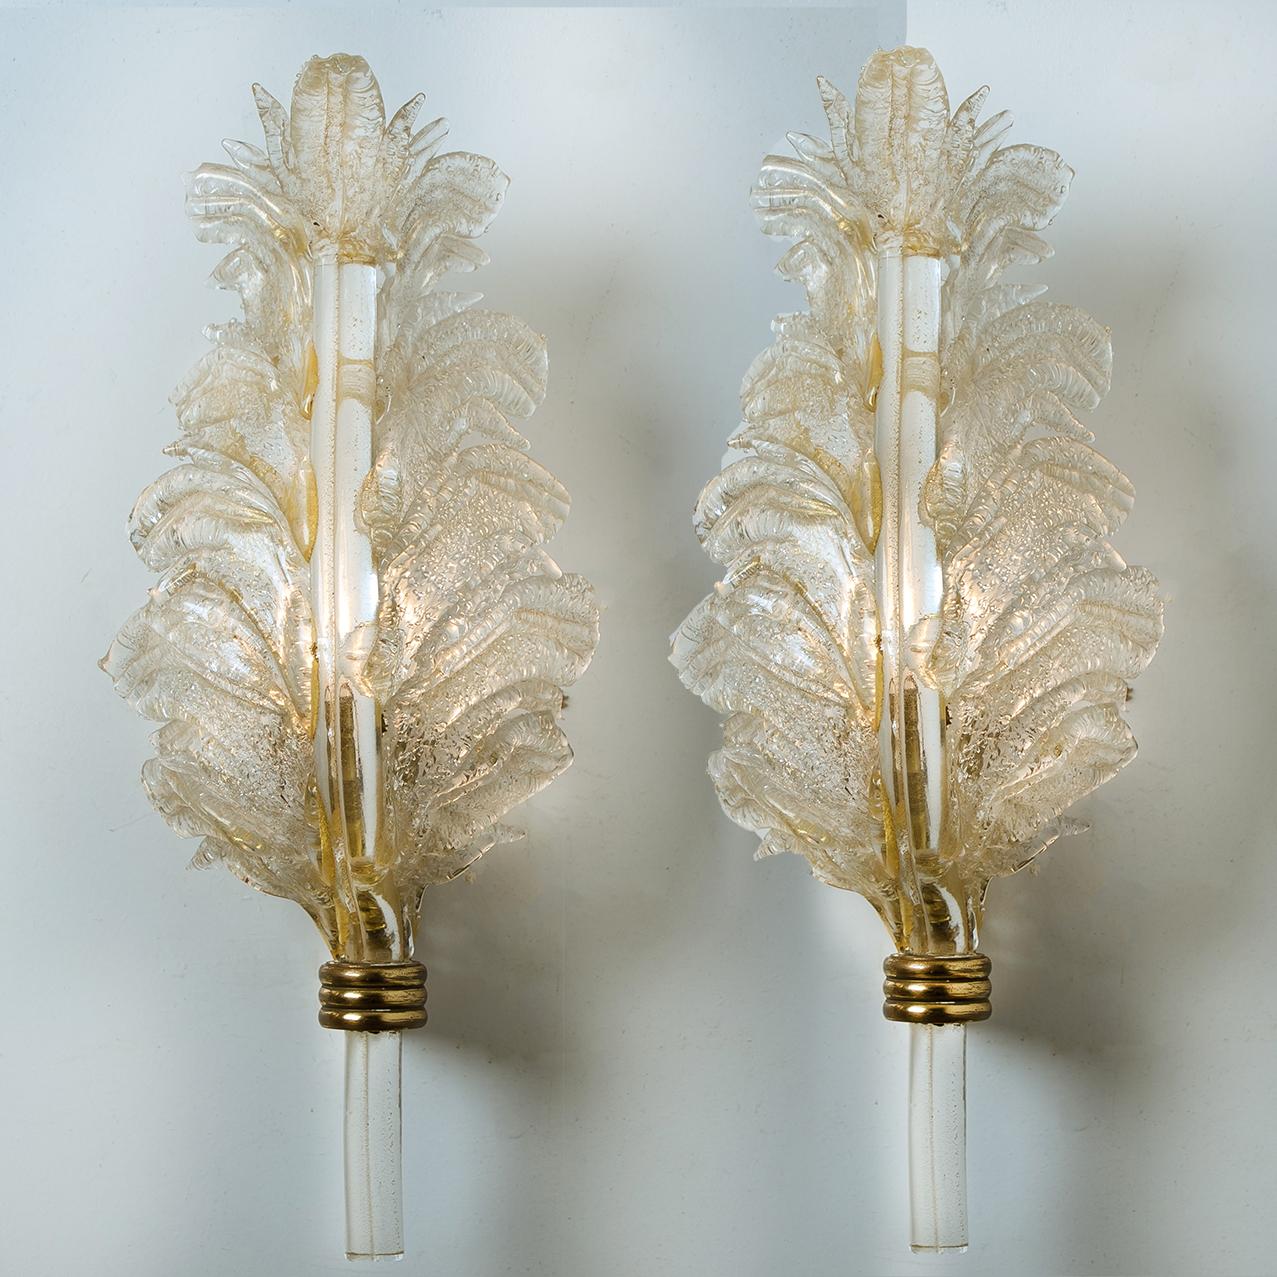 Pair of Large Wall Sconces Barovier & Toso Gold Glass, Murano, Italy 1